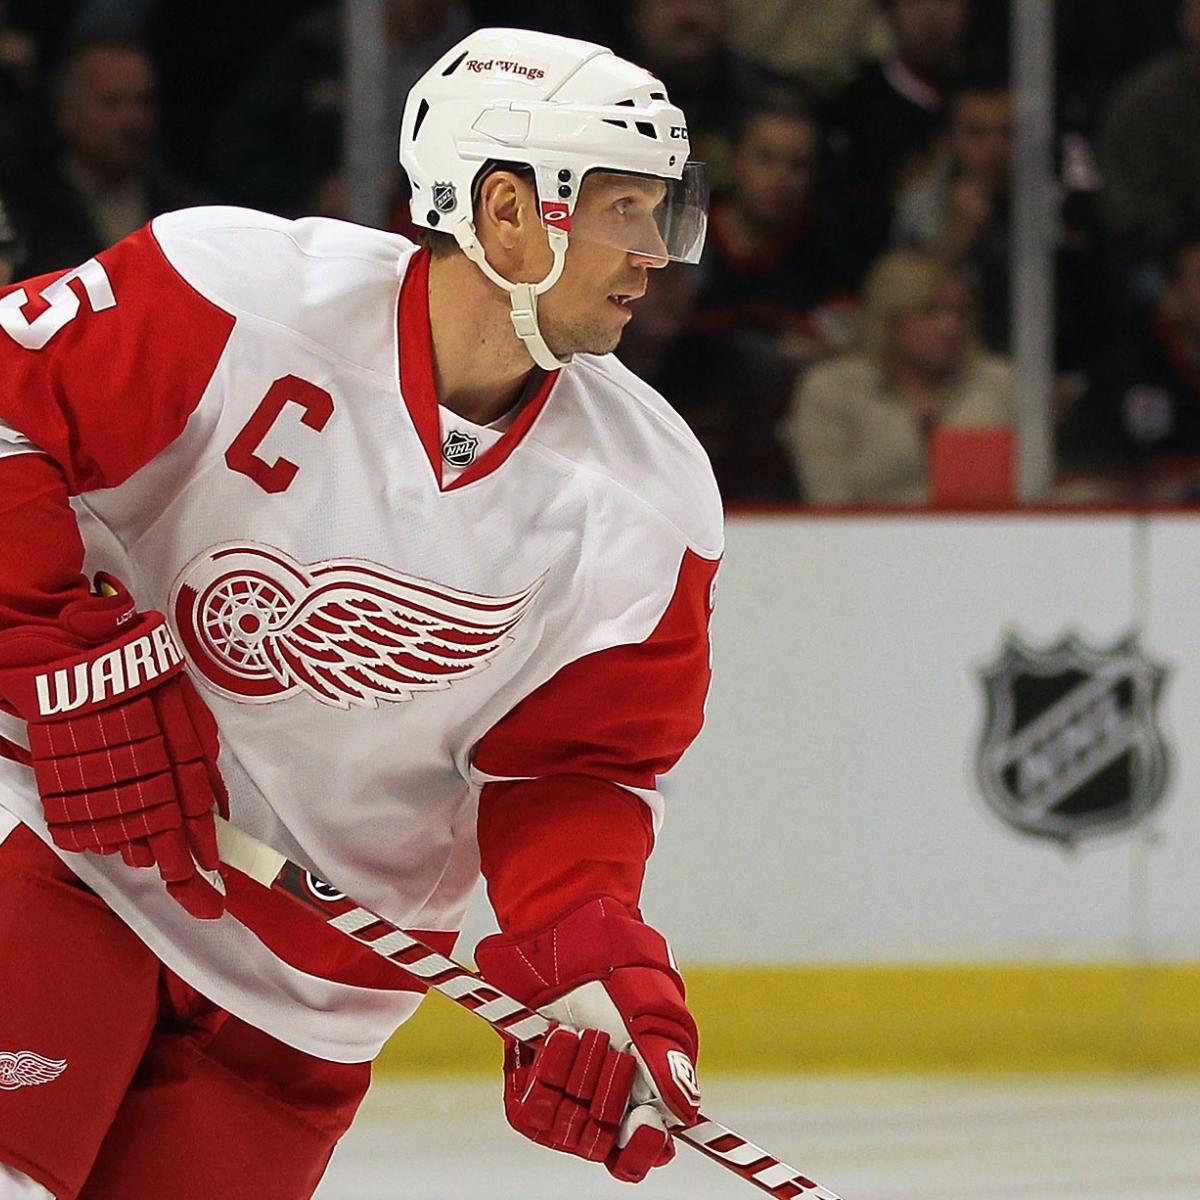 Henrik Zetterberg is the latest NHL star with his own awesome